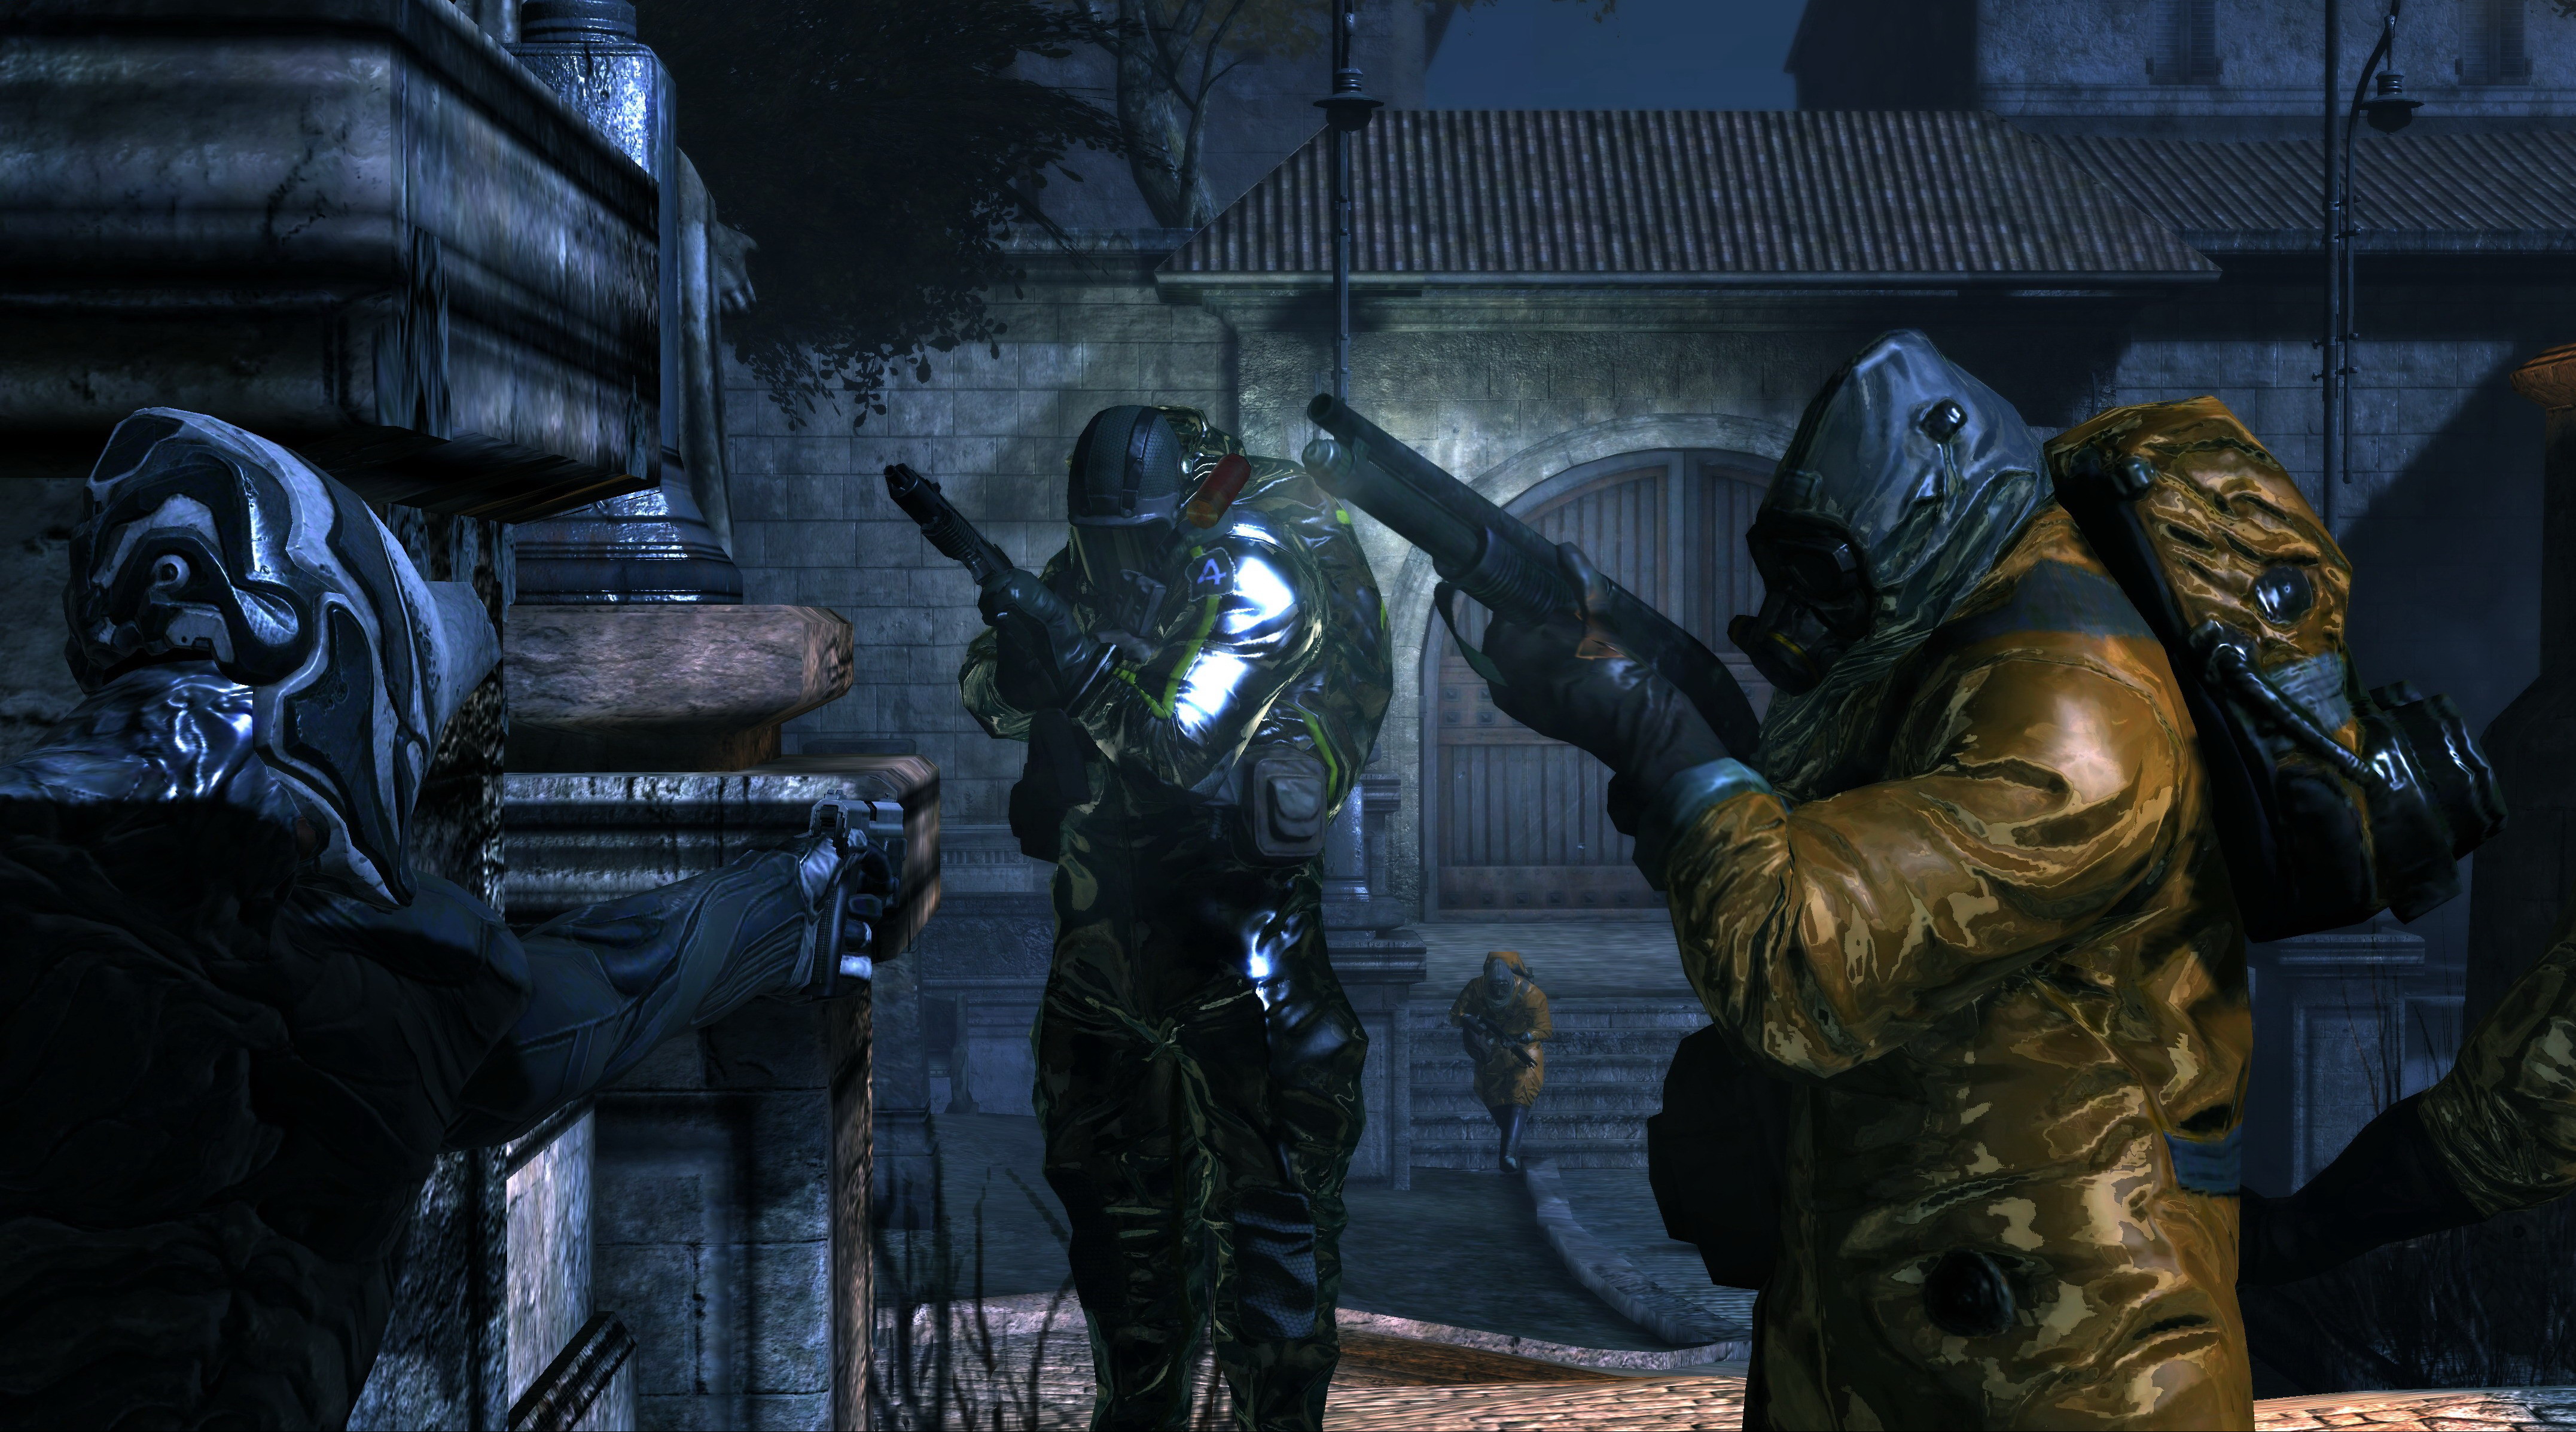 Игра dark sector. Dark sector (2009). Dark sector 2. Dark sector 3.